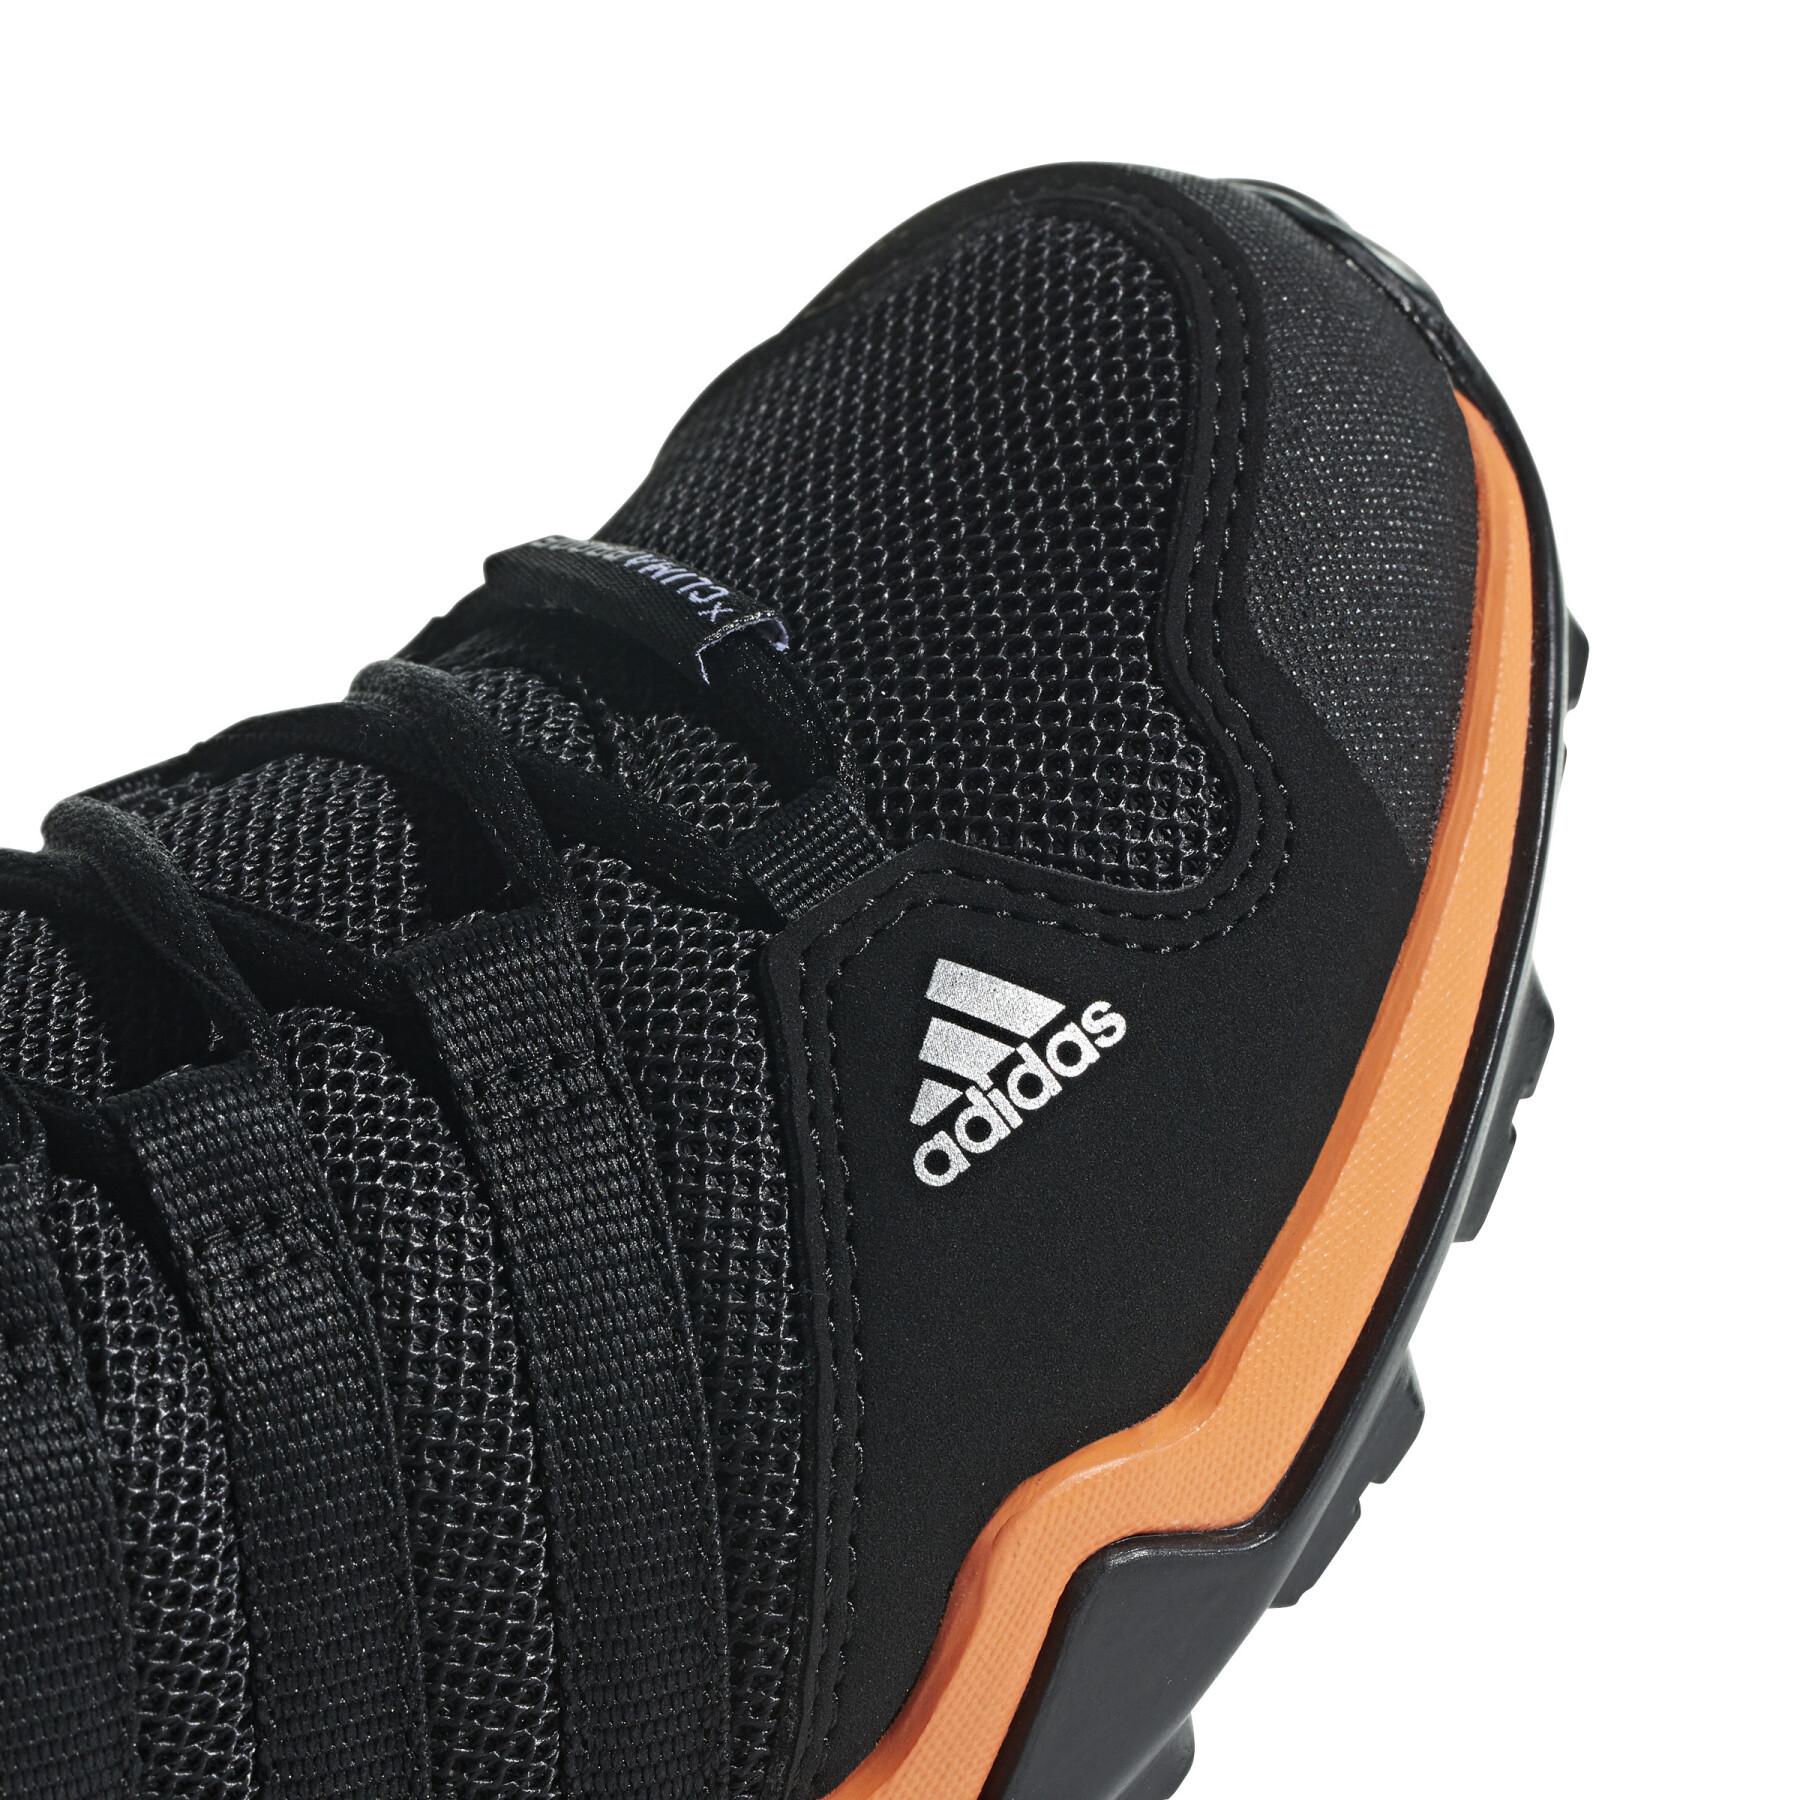 Children's hiking shoes adidas AX2R ClimaProof